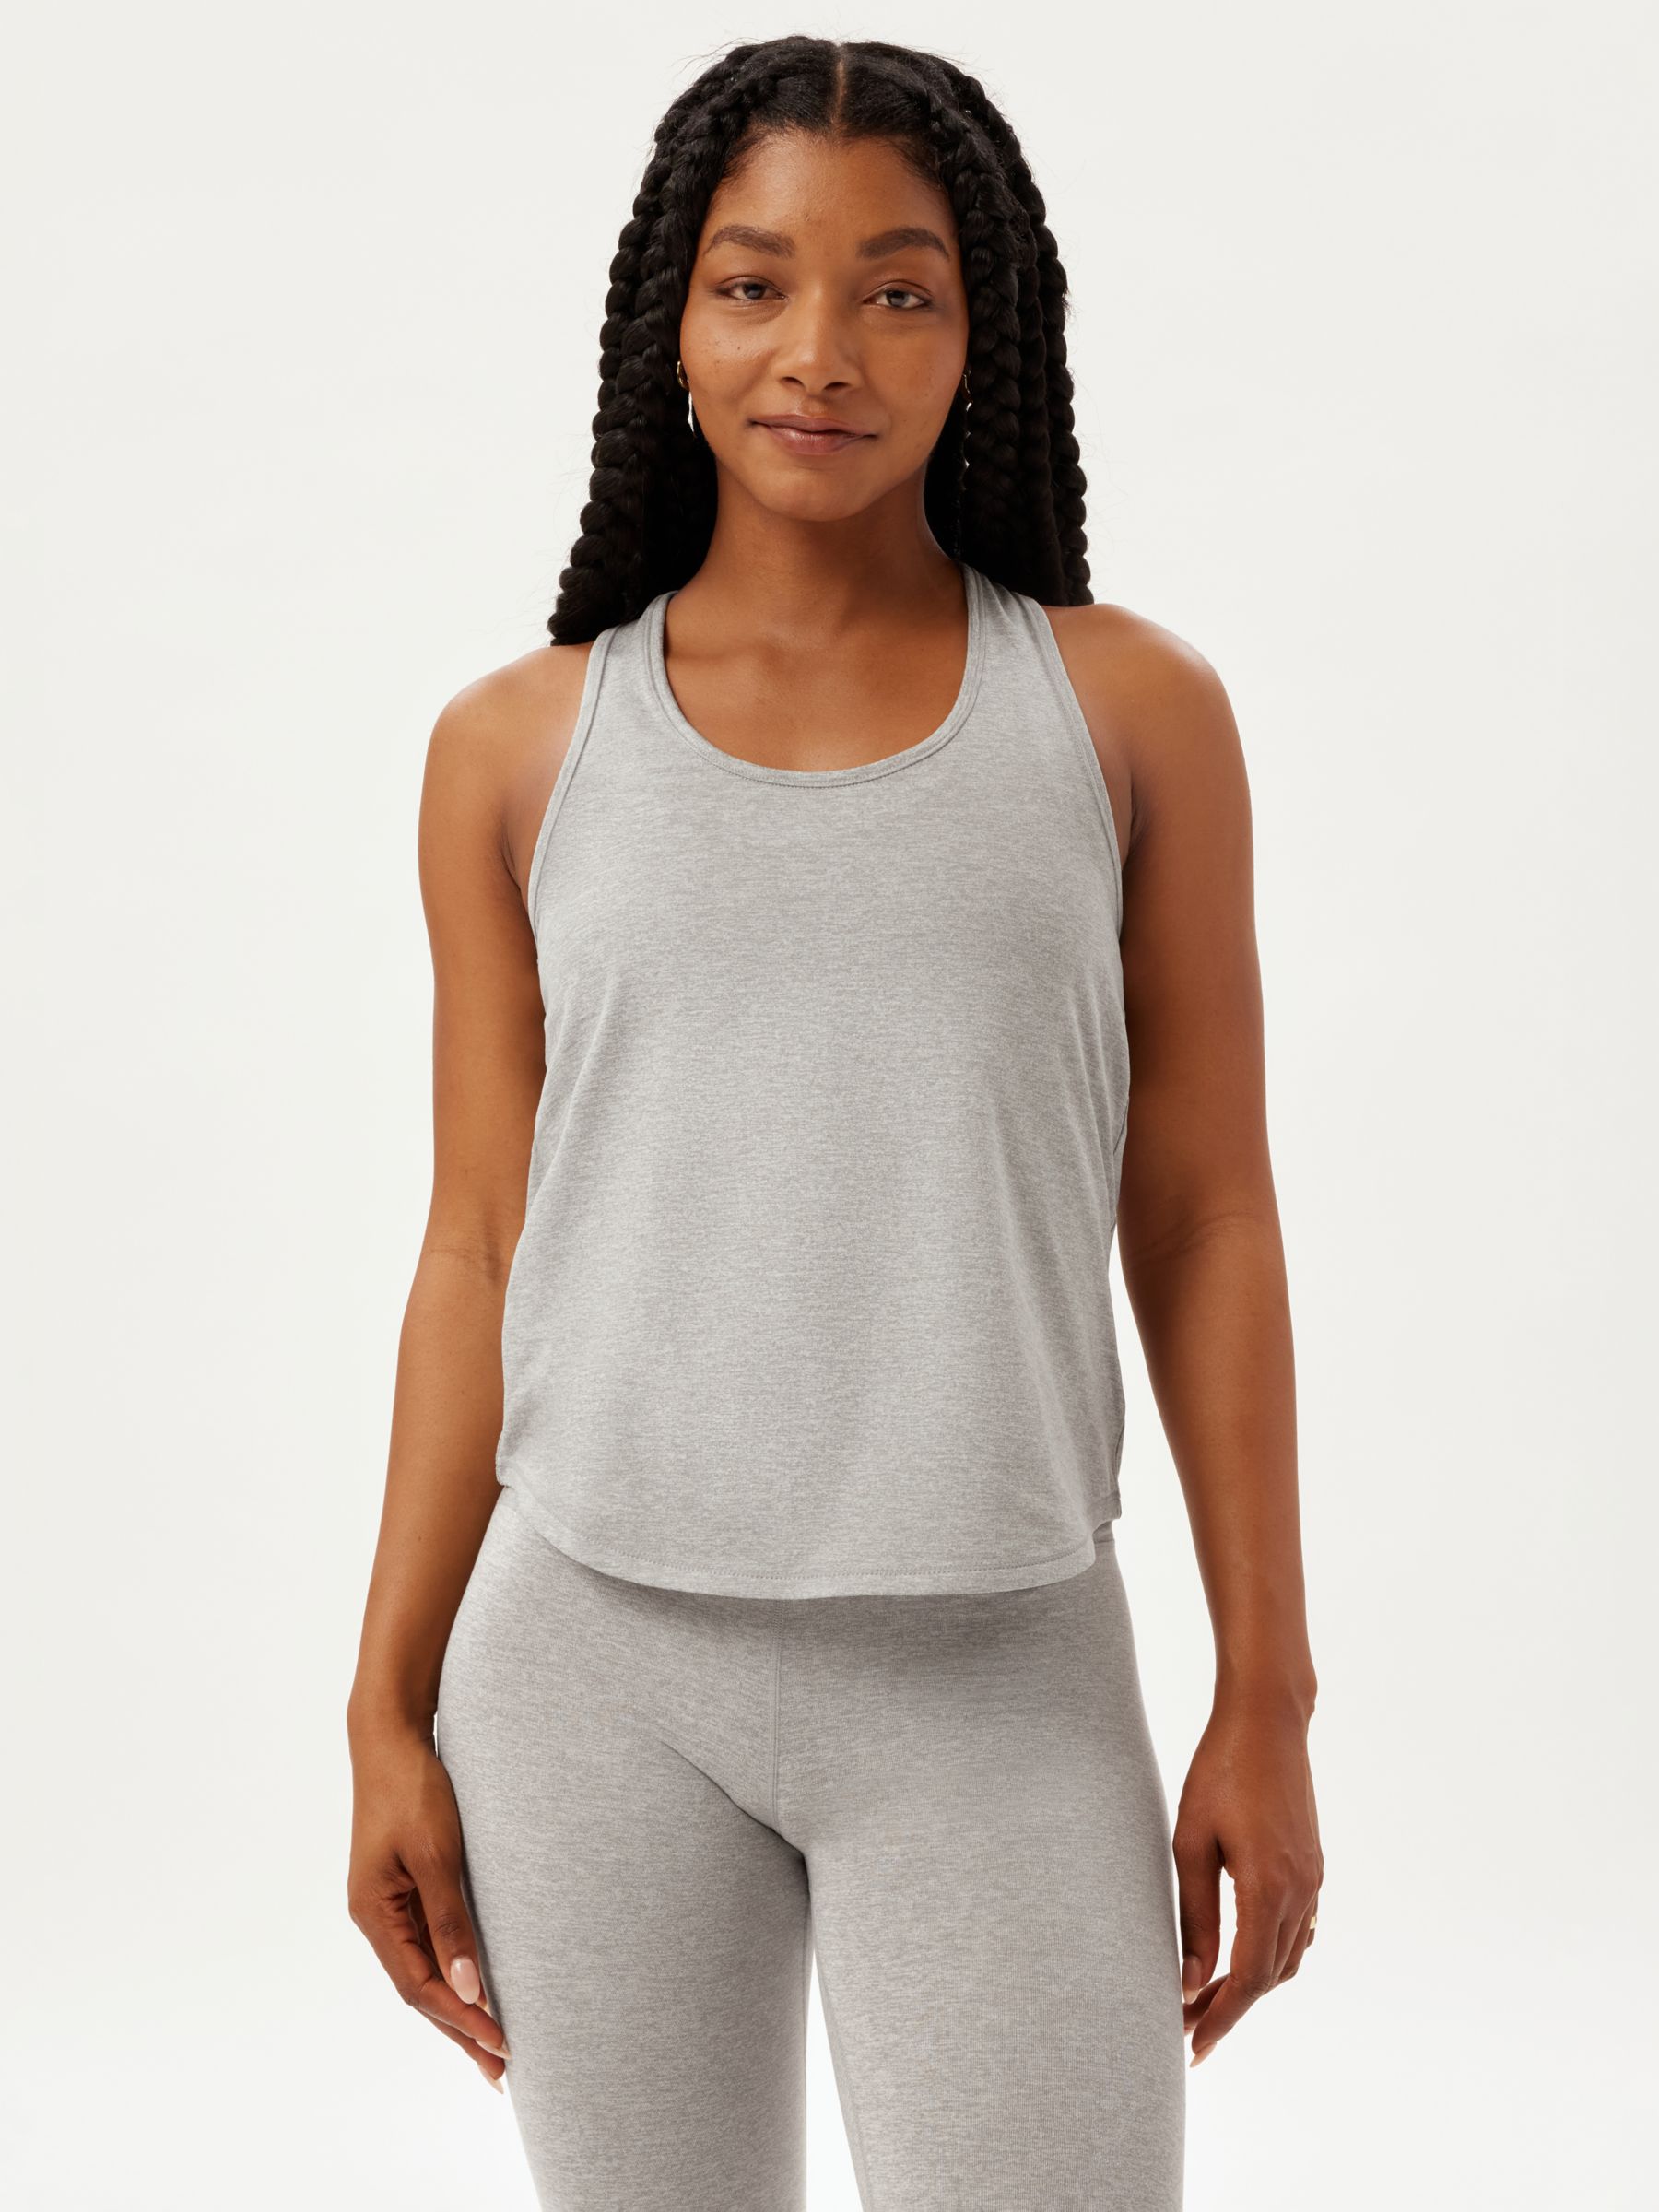 Girlfriend Collective Reset Relaxed Fit Tank Top, Coyote, S